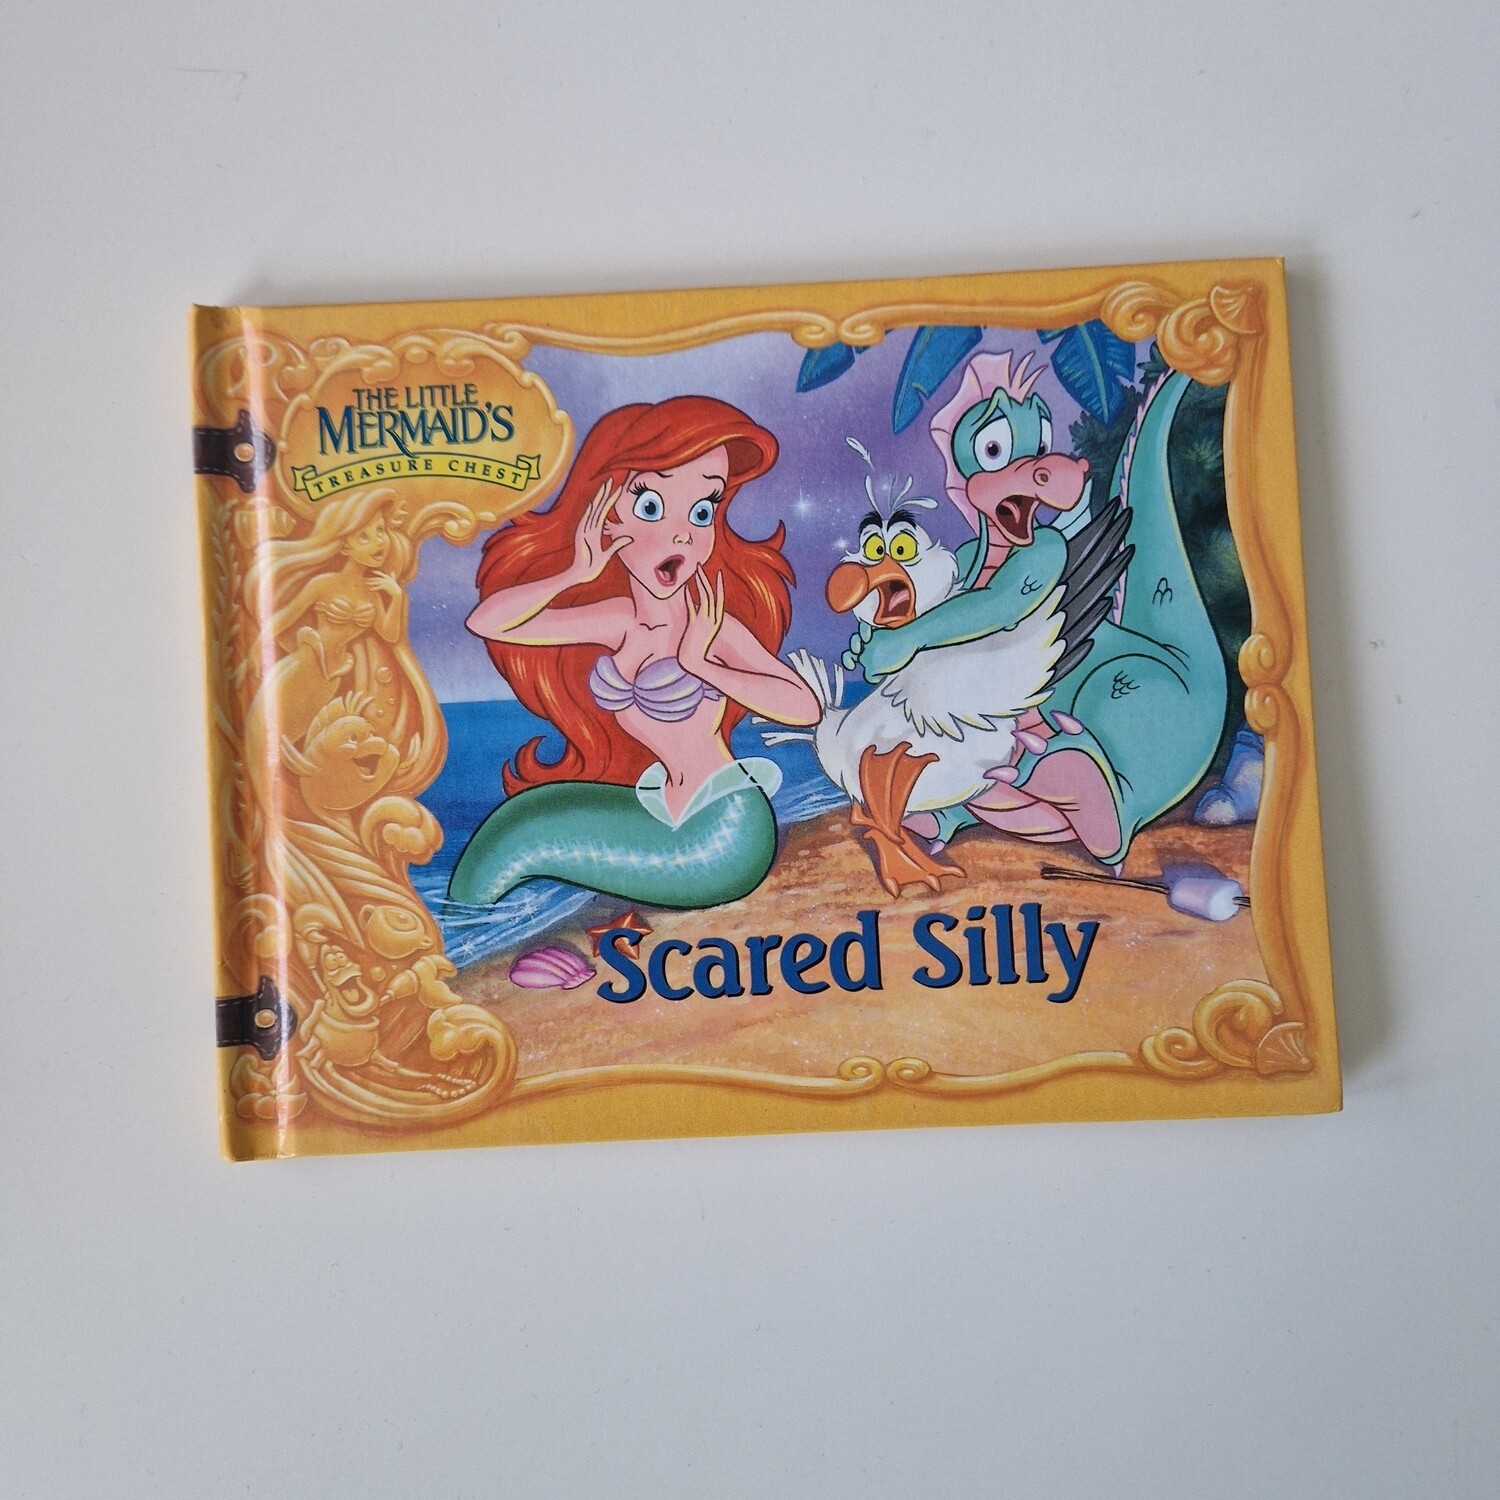 The Little Mermaid - Ariel, Scales & Scuttle - Scared Silly